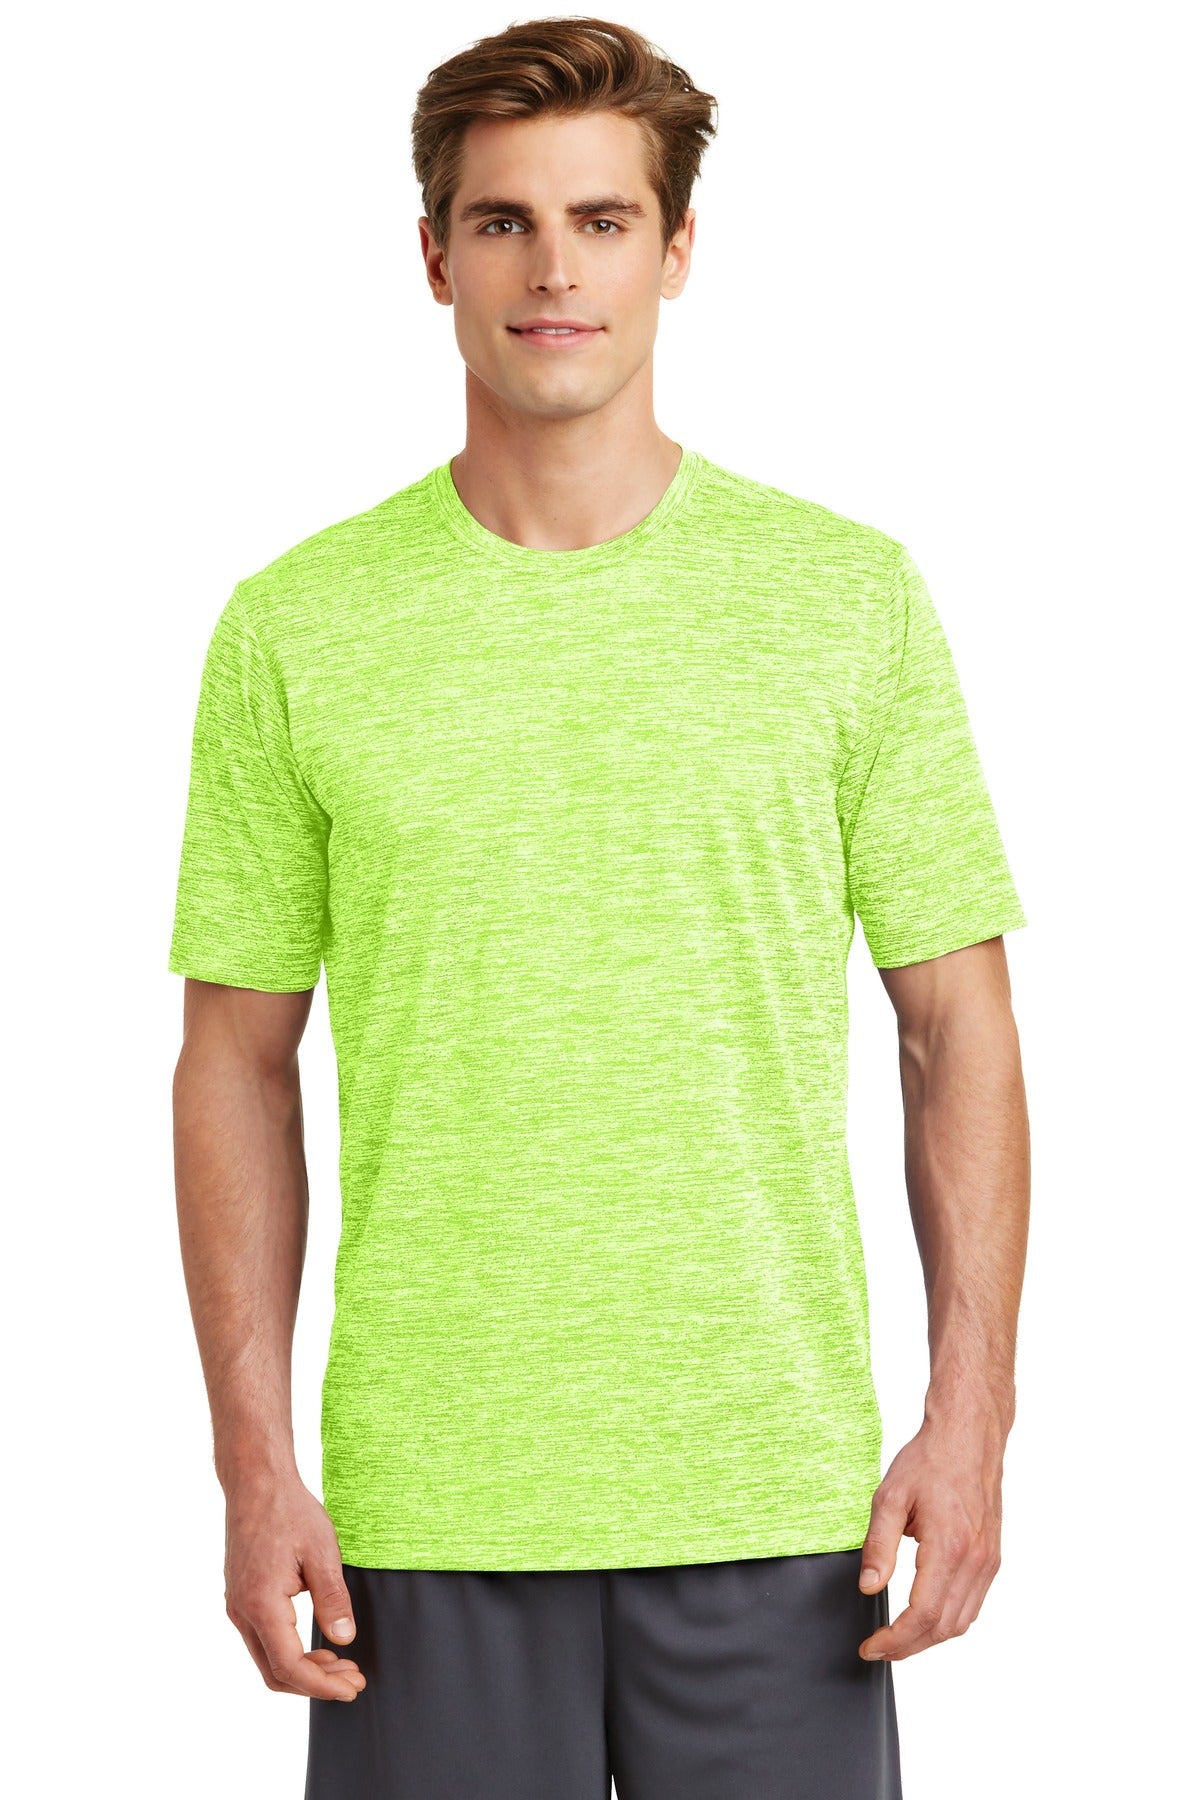 Sport-Tek® PosiCharge® Electric Heather Tee. ST390 [Lime Shock Electric] - DFW Impression